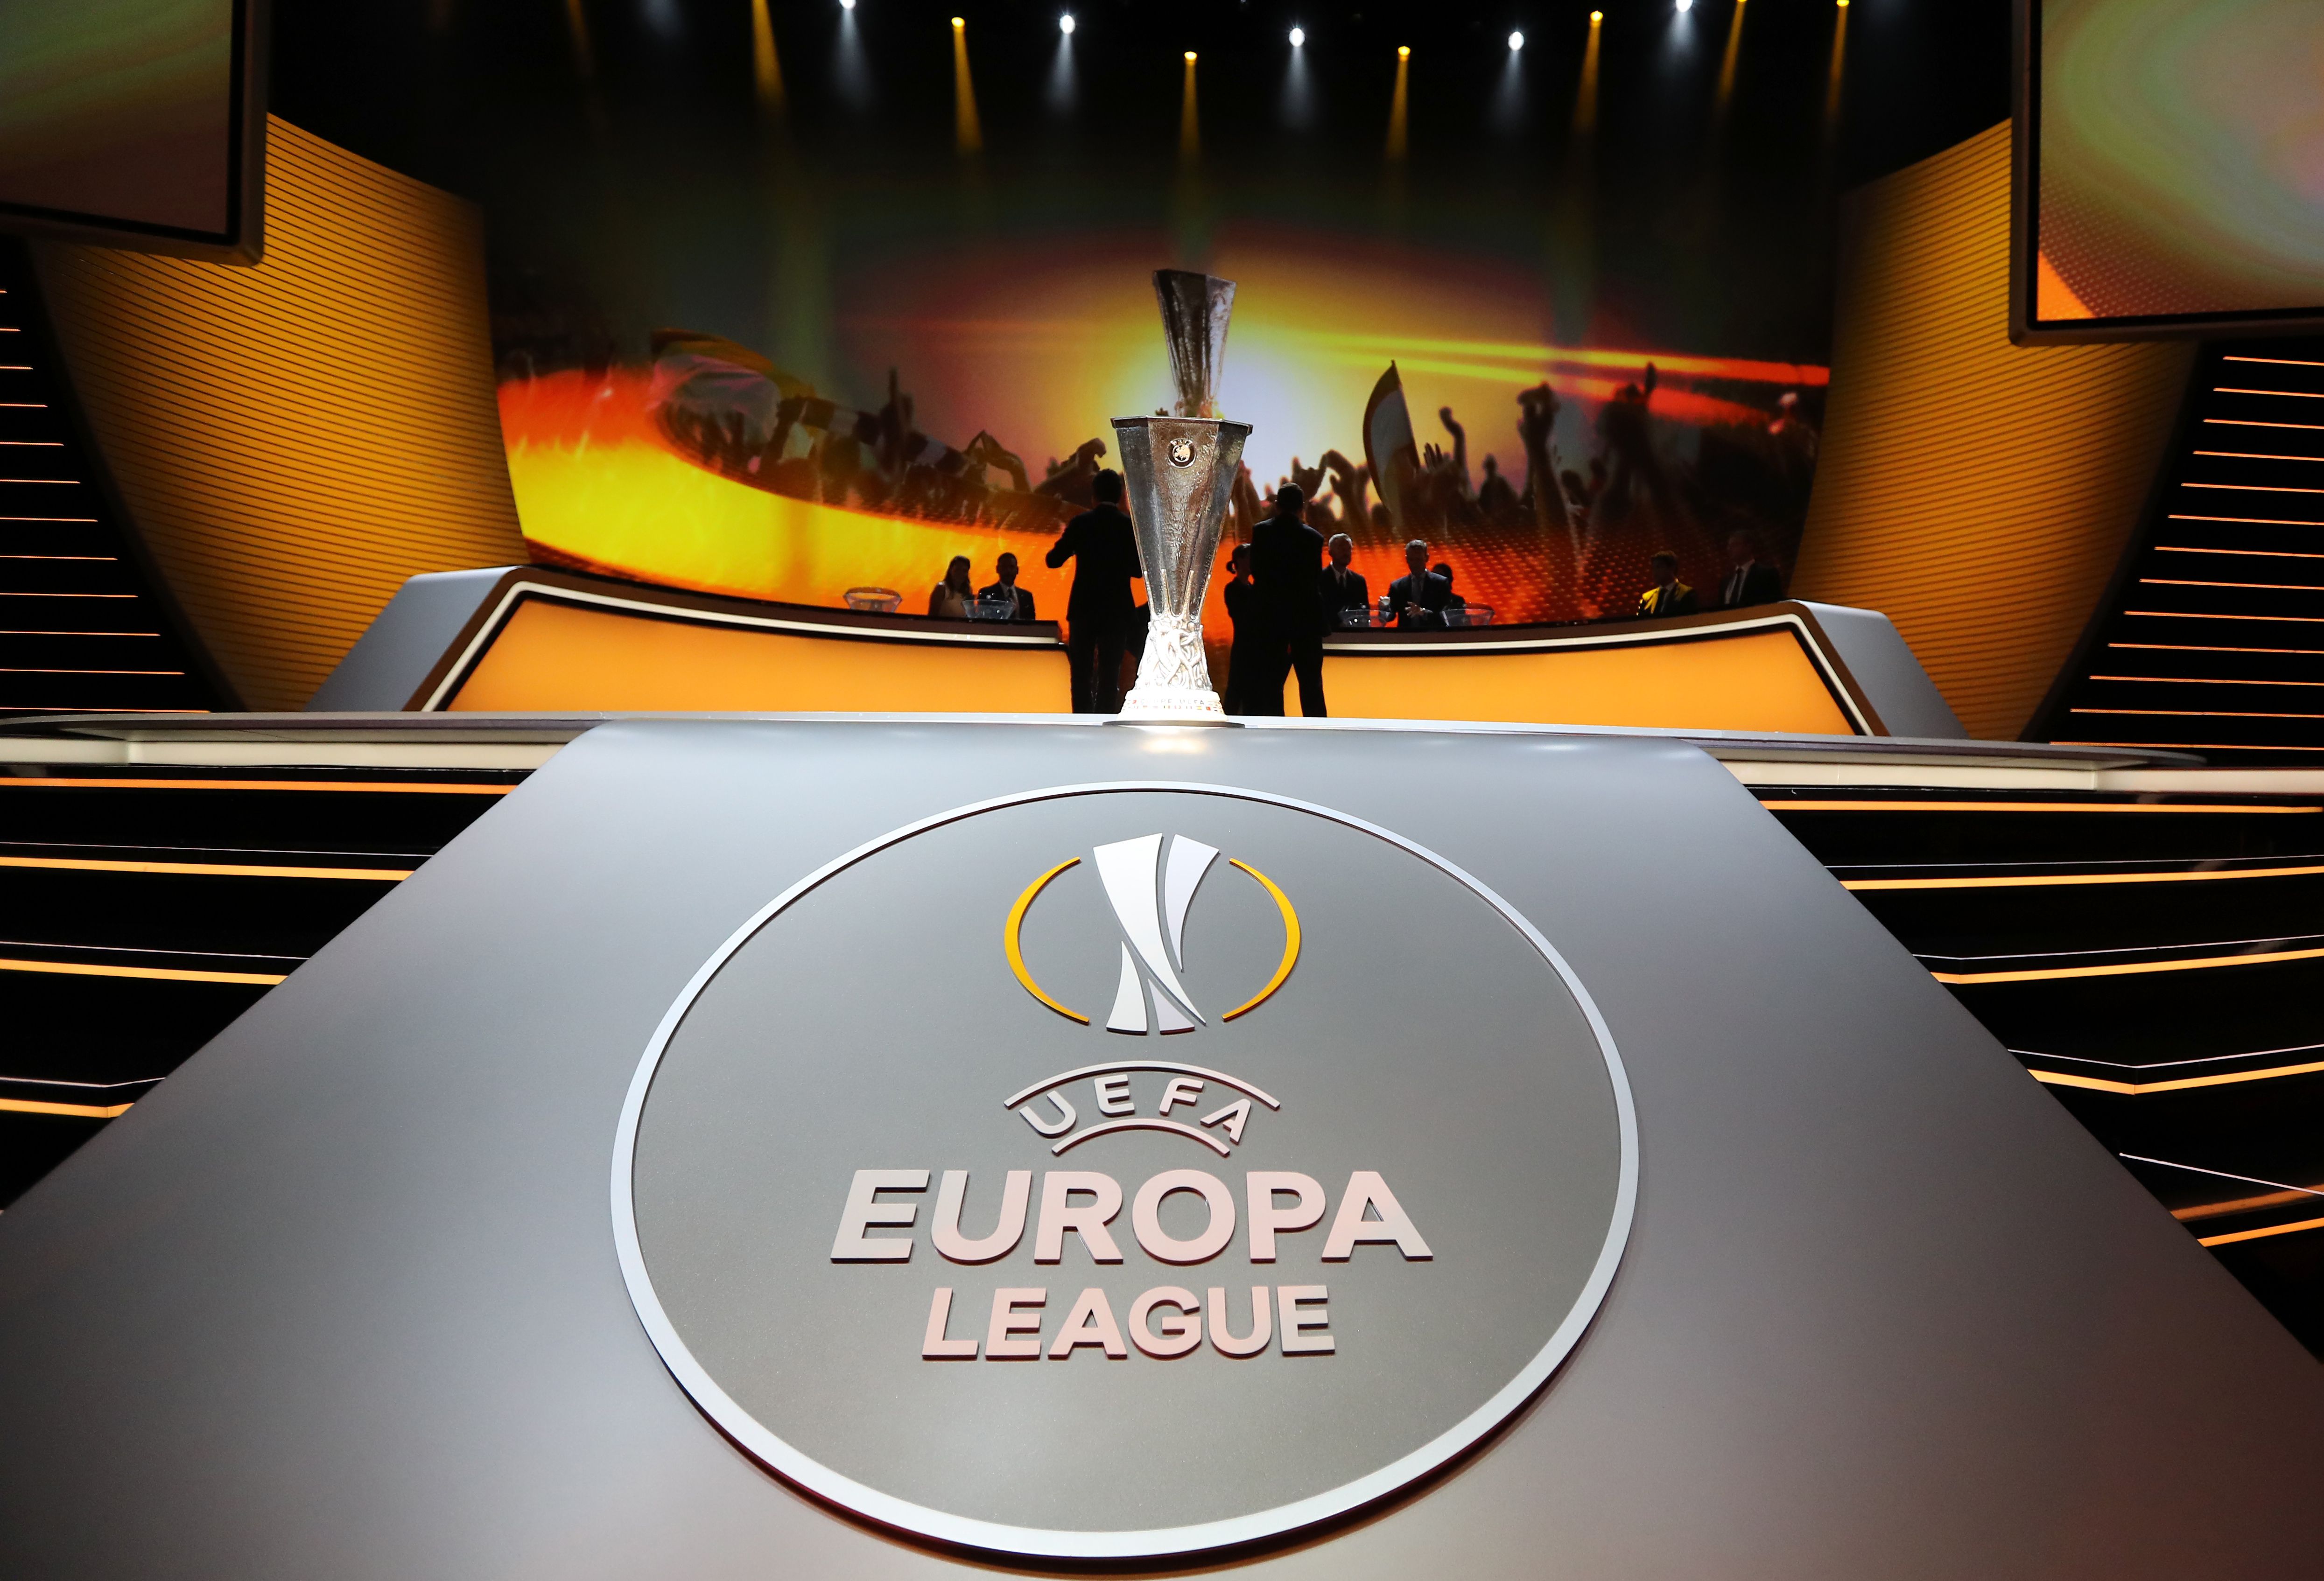 The UEFA Europa League trophy is pictured during the UEFA Europa League group stage draw ceremony, on August 26, 2016, in Monaco. / AFP / VALERY HACHE        (Photo credit should read VALERY HACHE/AFP/Getty Images)